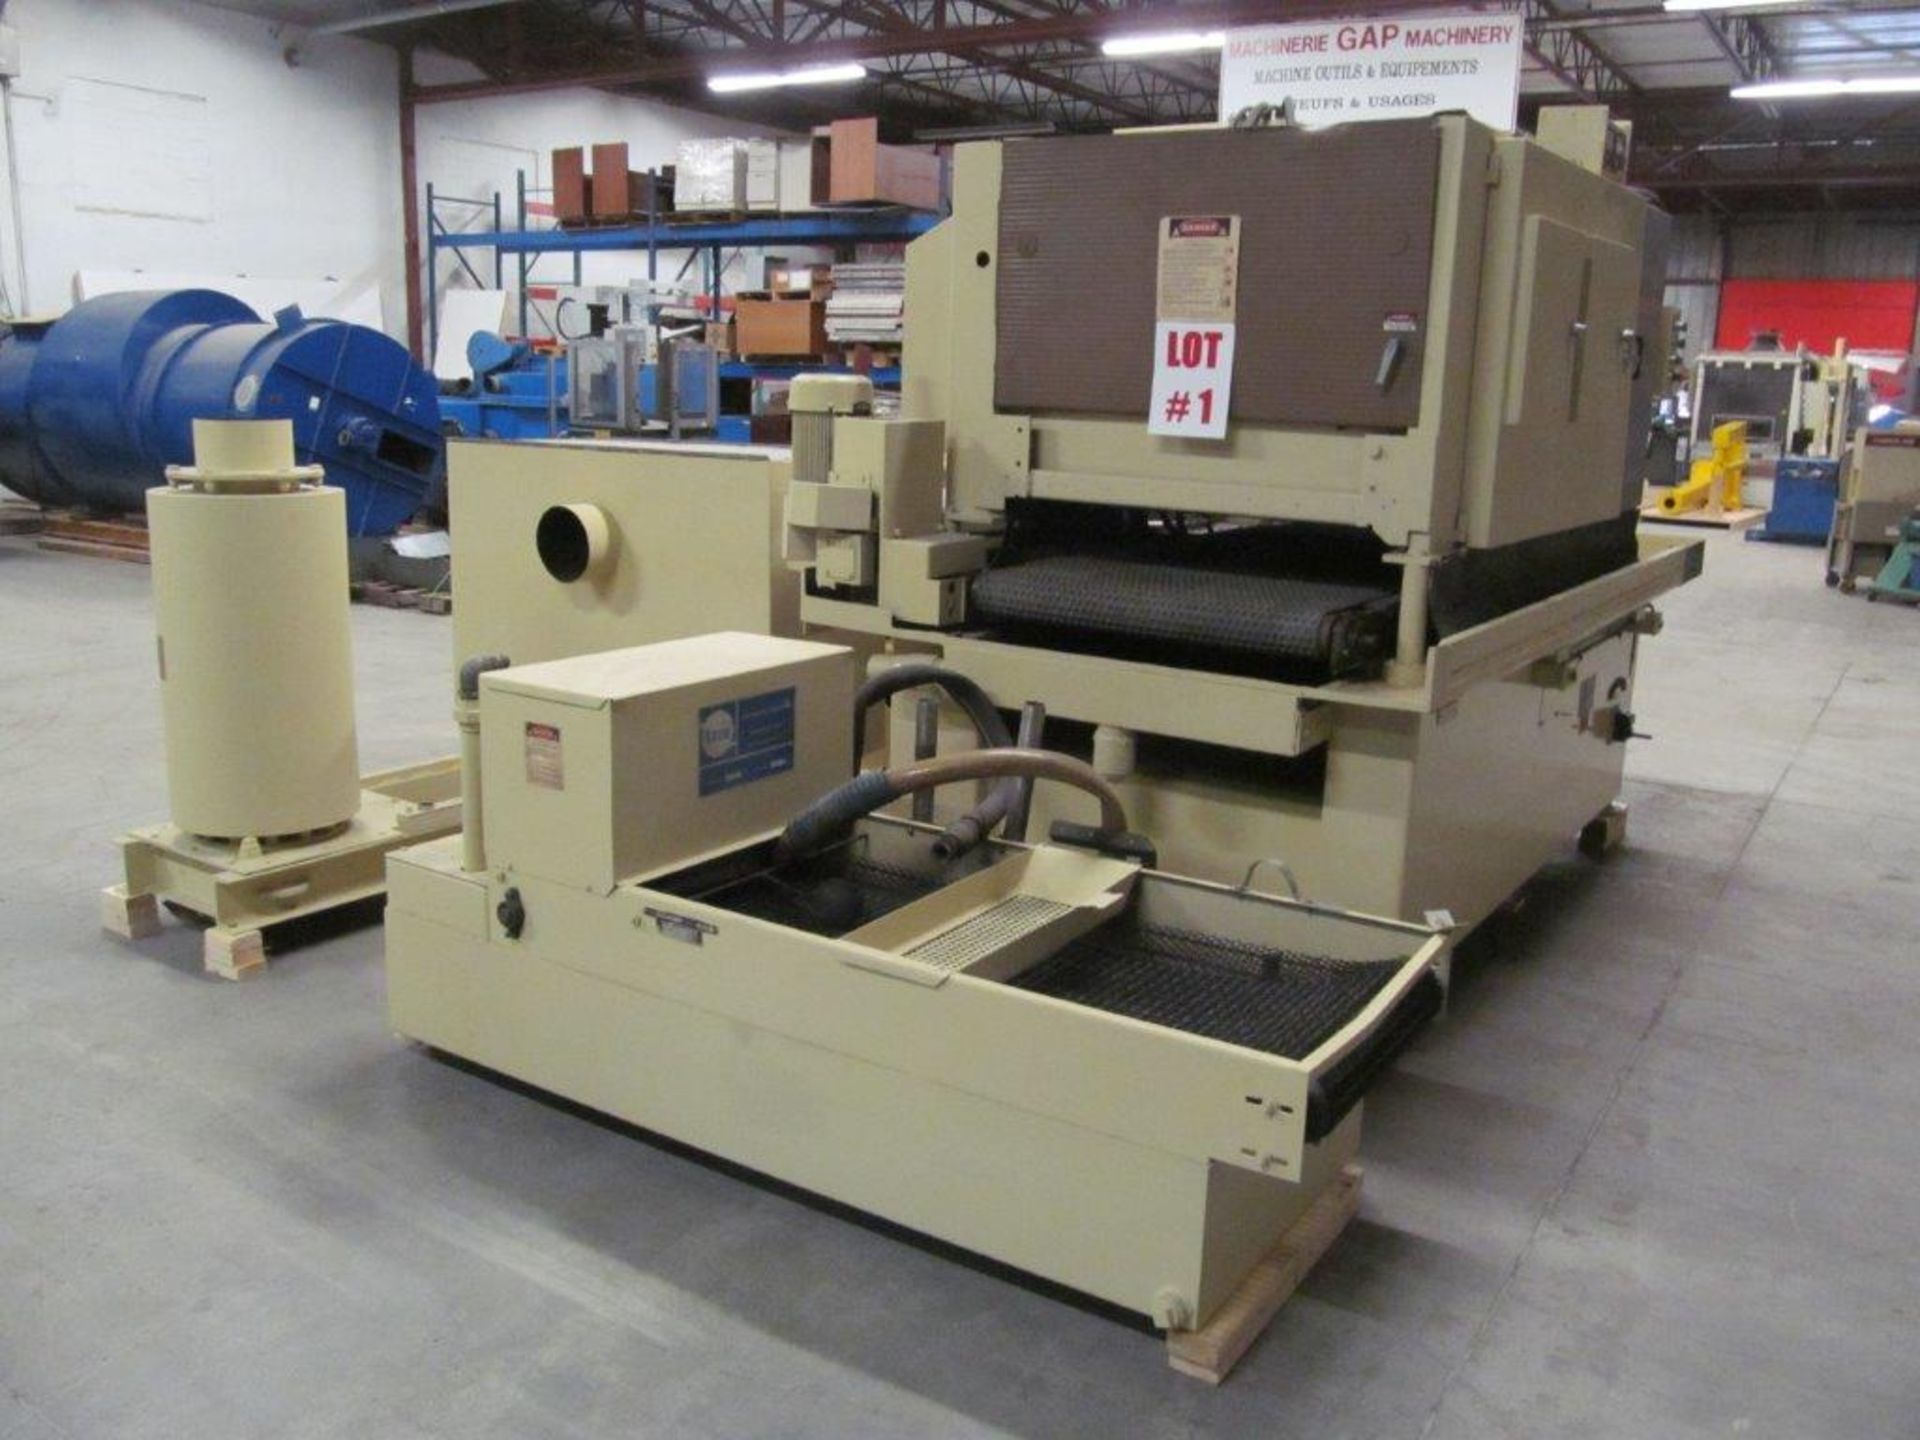 TIMESAVER MODEL 237-2CMPLW, S/N: 19989, 36" WIDE MATERIAL WET TYPE, ELECTRICS: 575 V / 3PH / 60C, - Image 9 of 14